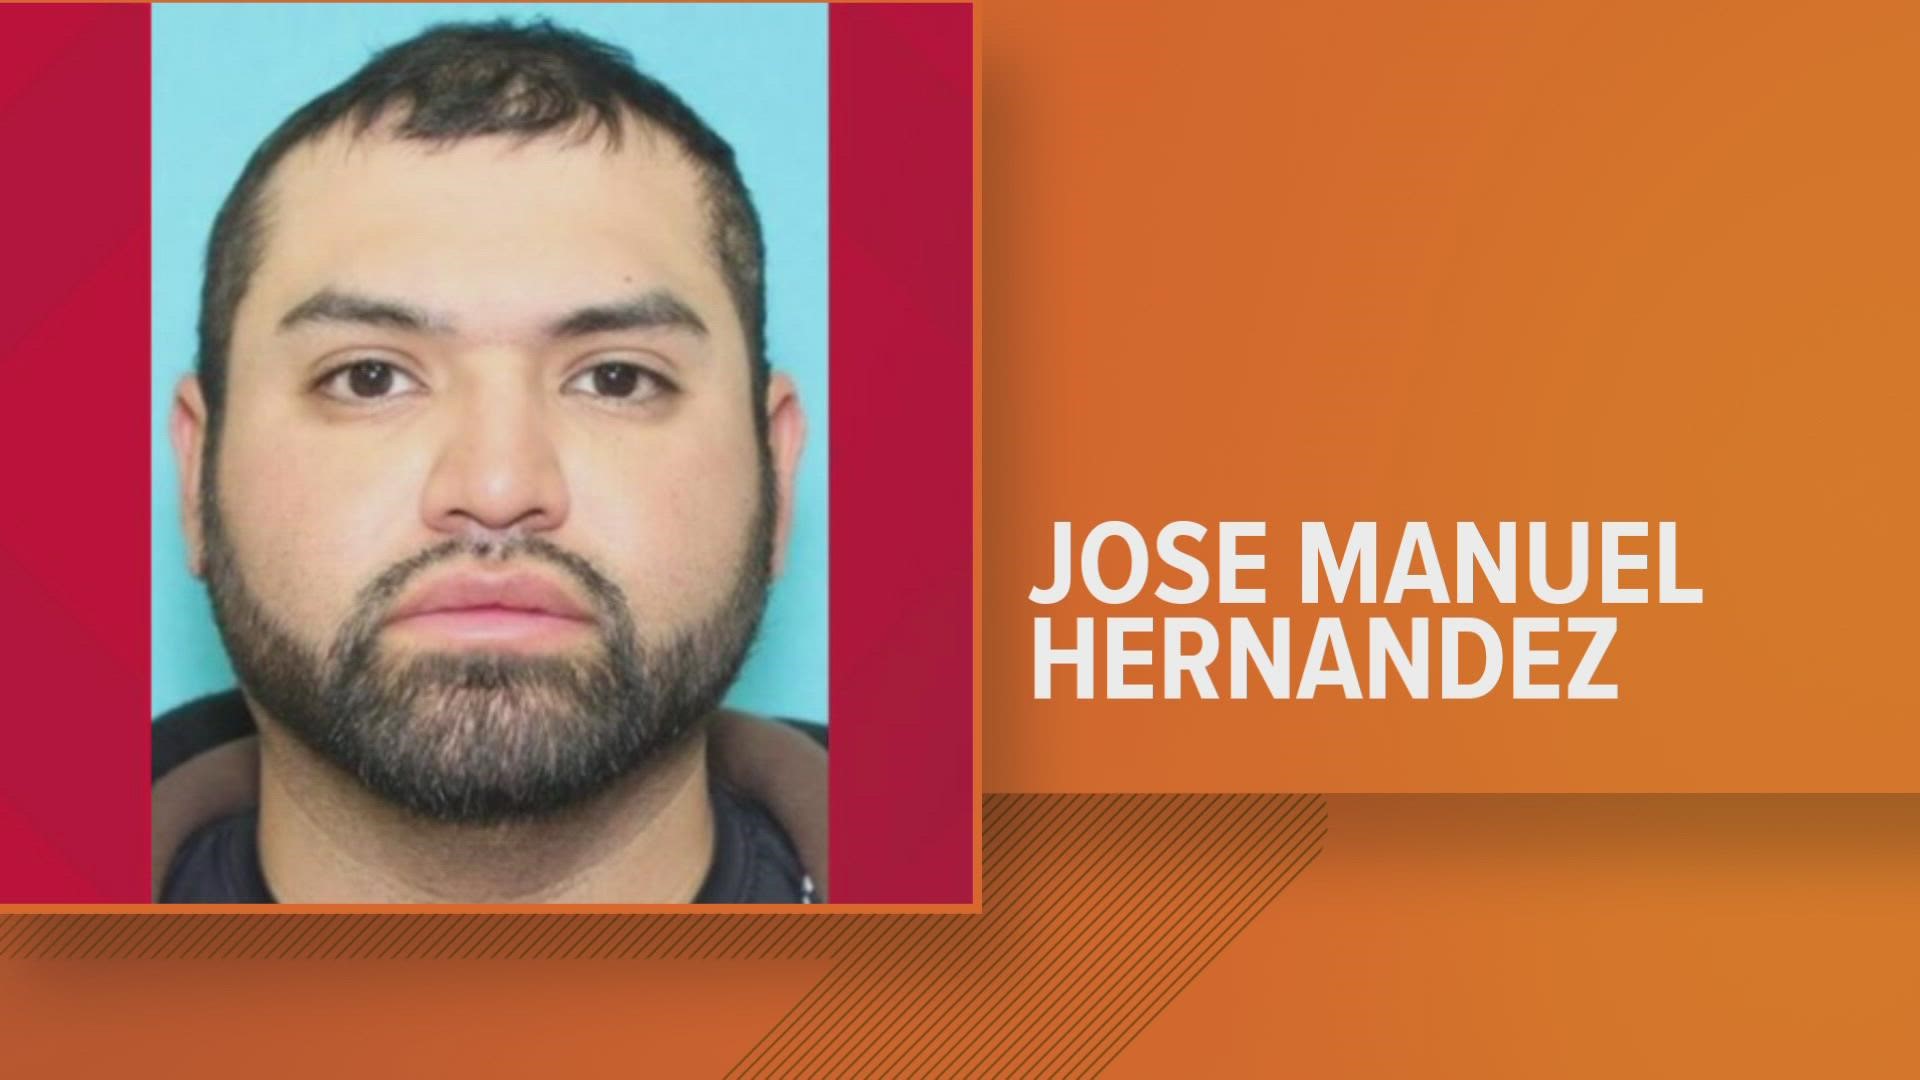 Jose Hernandez was arrested for two counts of aggravated sexual assault of a child. He bonded out in 2021 and has not been seen since.